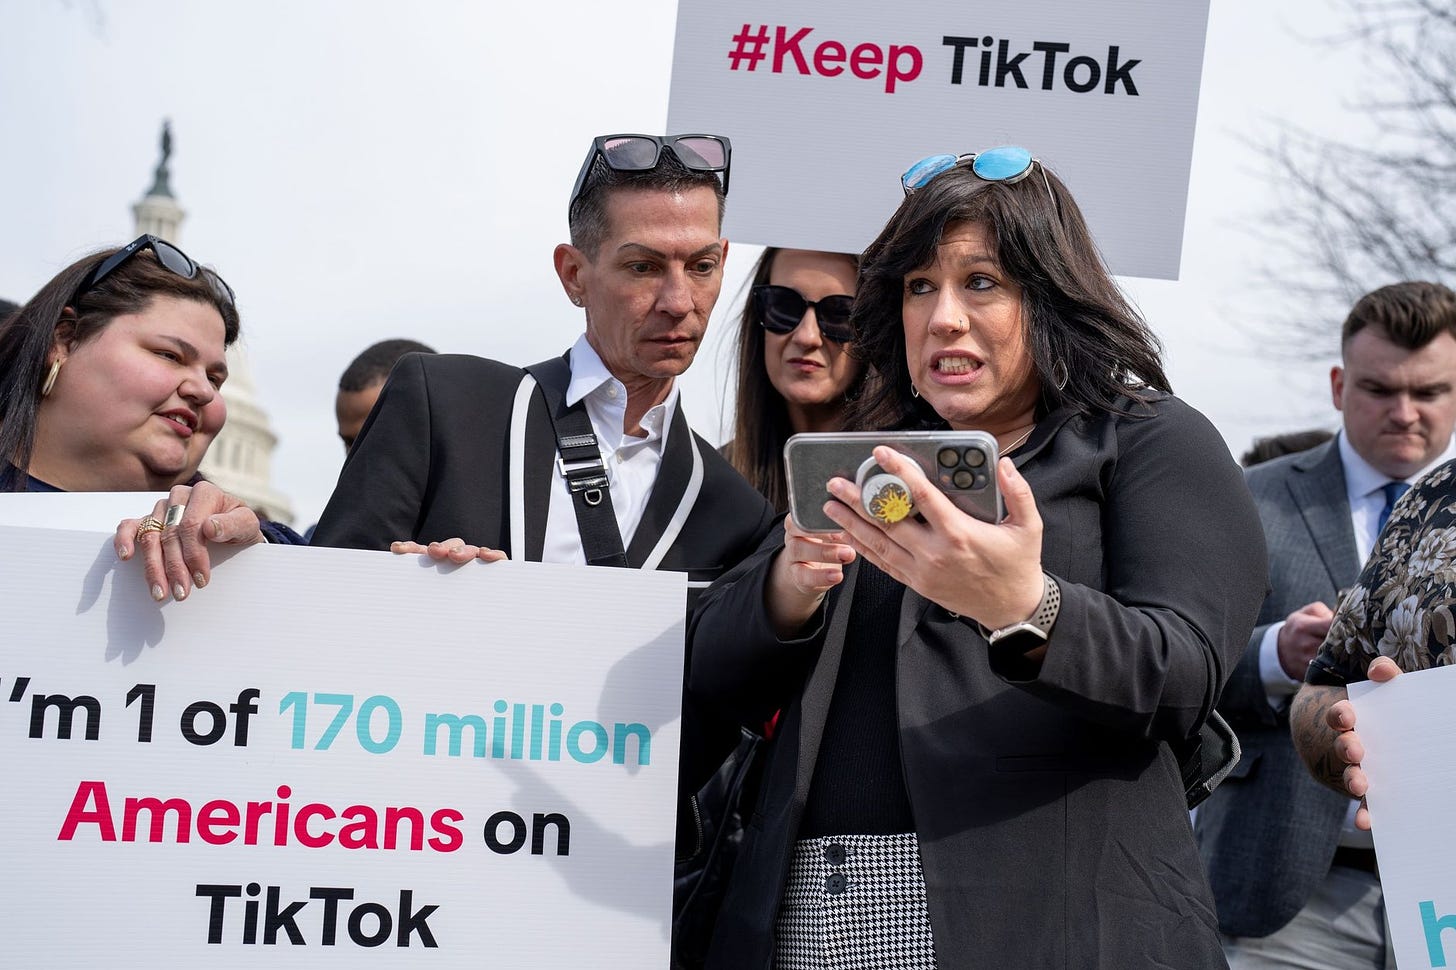 An extraordinary speech restriction': In legal filings, TikTok blasts  potential US ban | Courthouse News Service